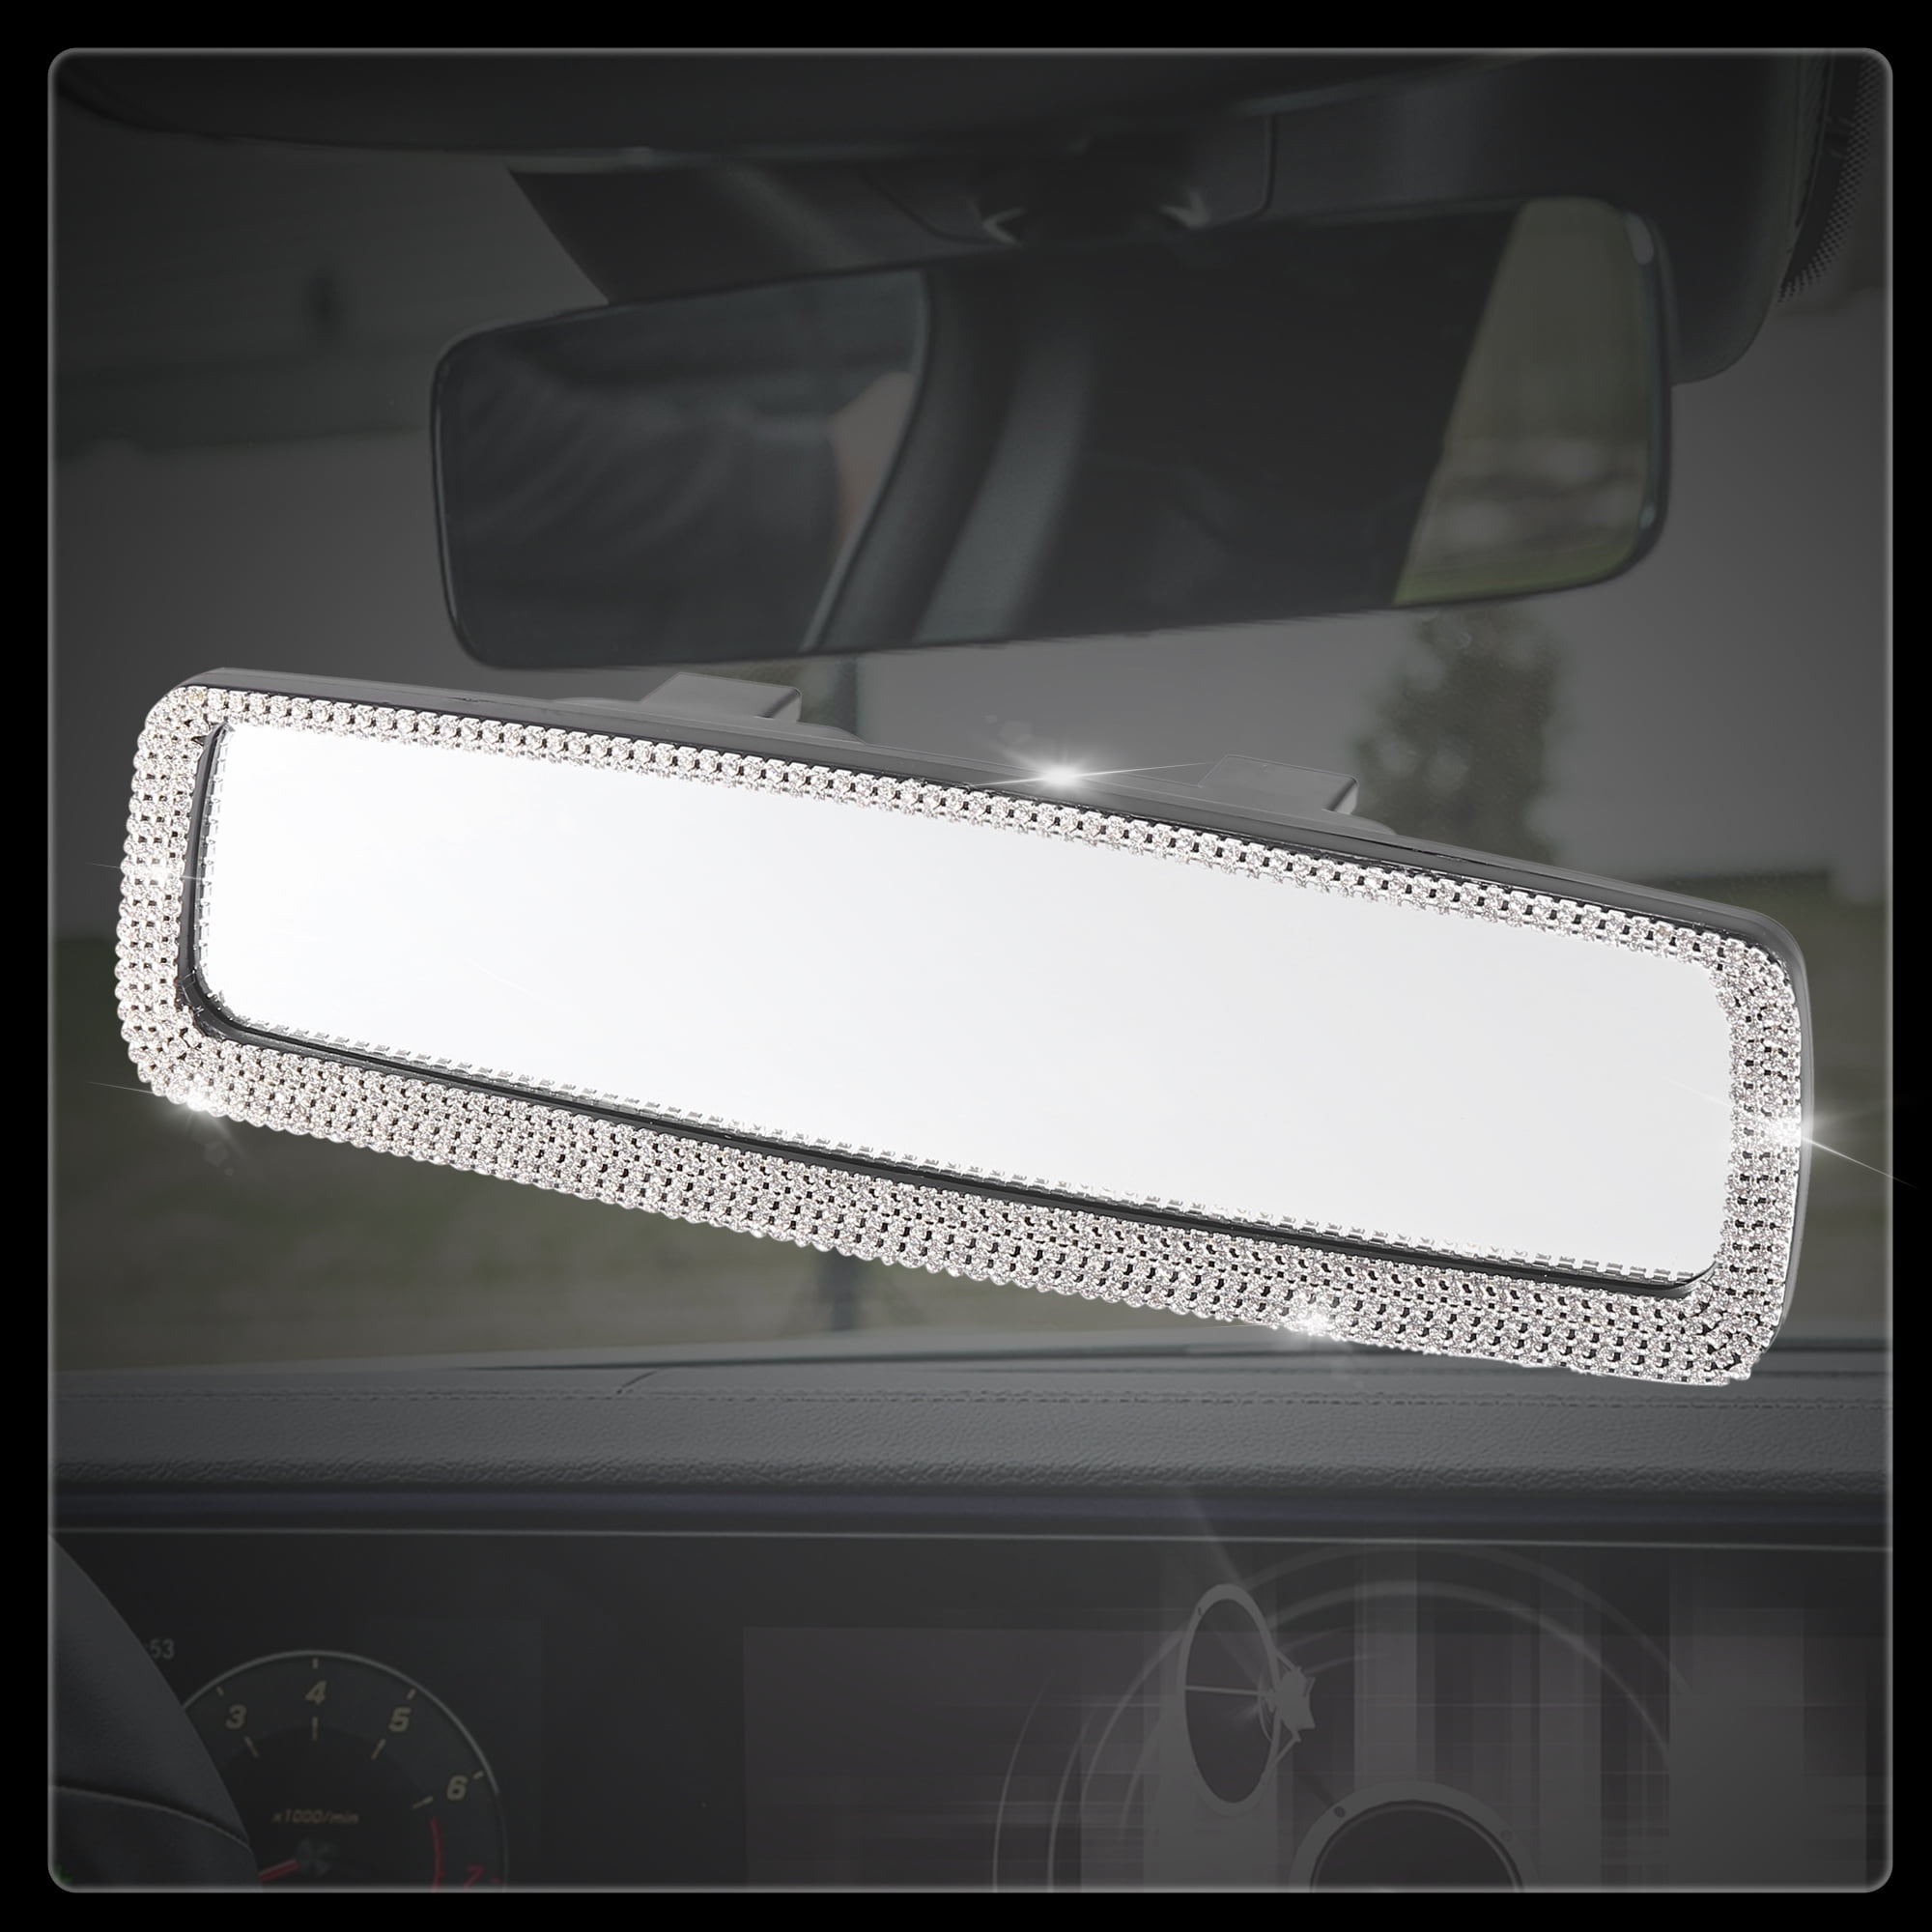 NEW CrystaI Ice Out Interior Rear View Mirror Cover Frame Bling Mercedes Benz 